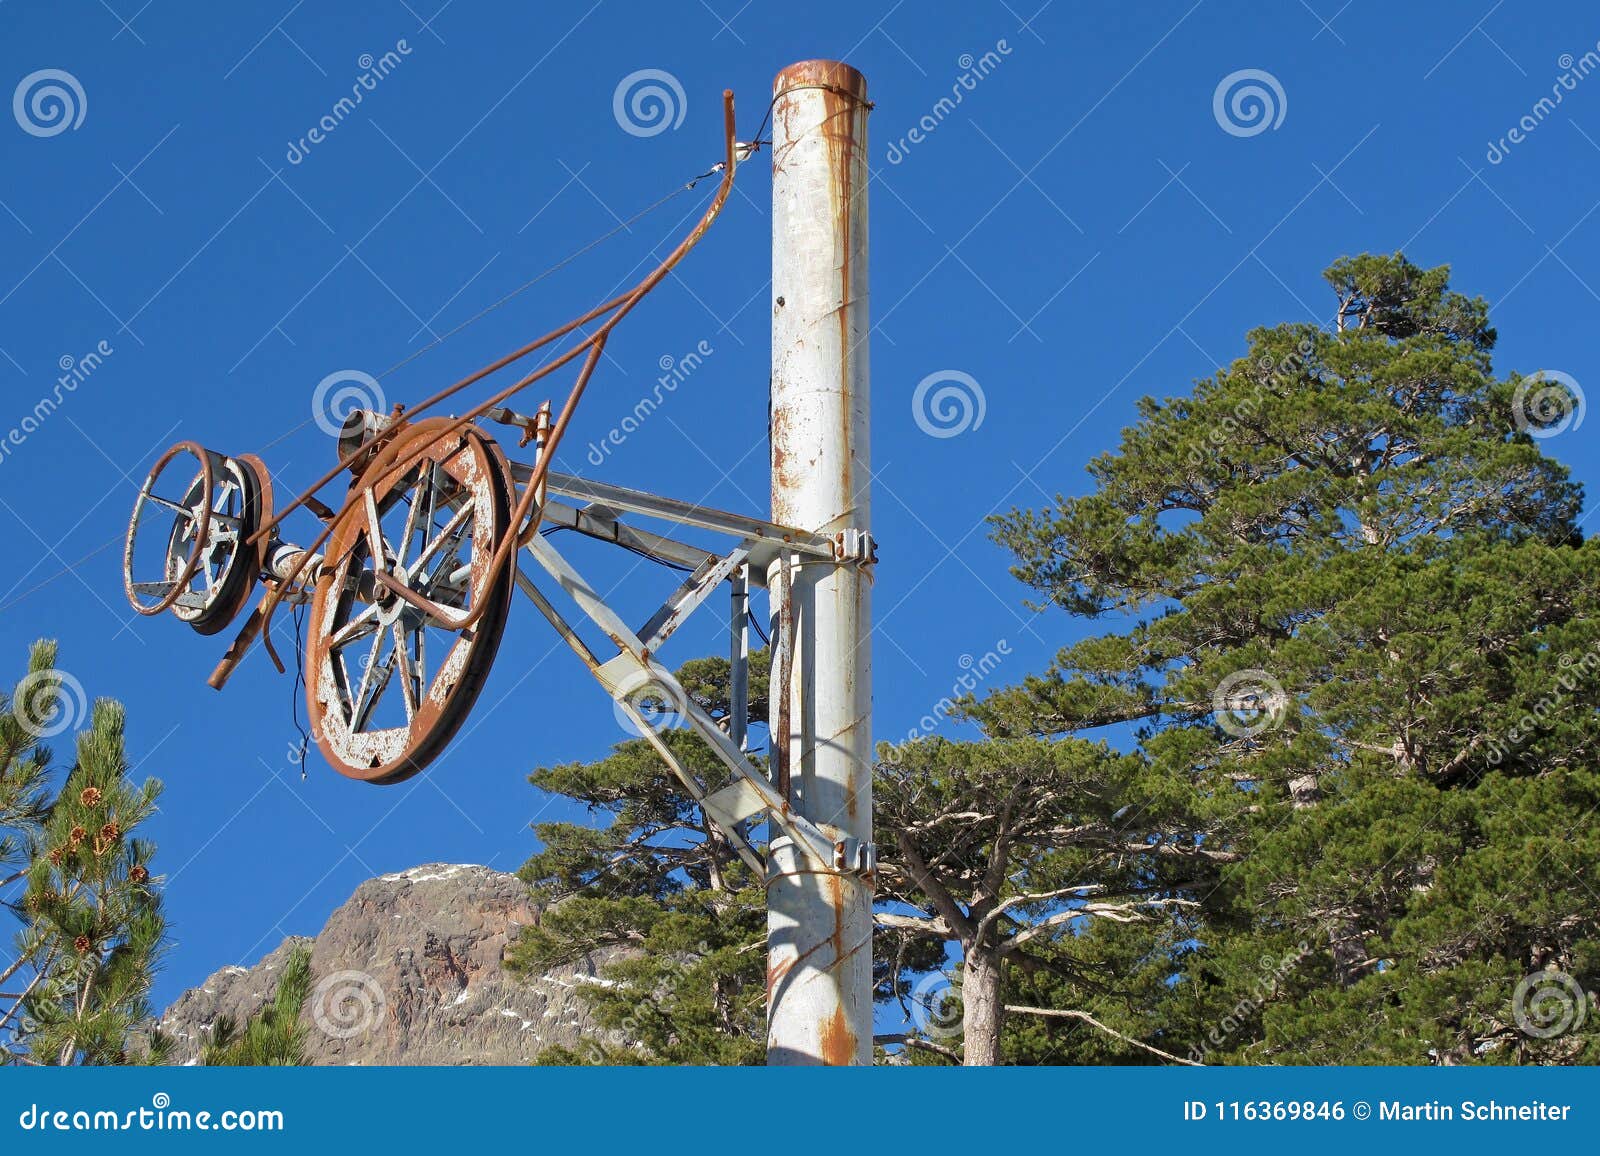 old rusty pillar of an abandoned skilift in the ese valley, corsica, france